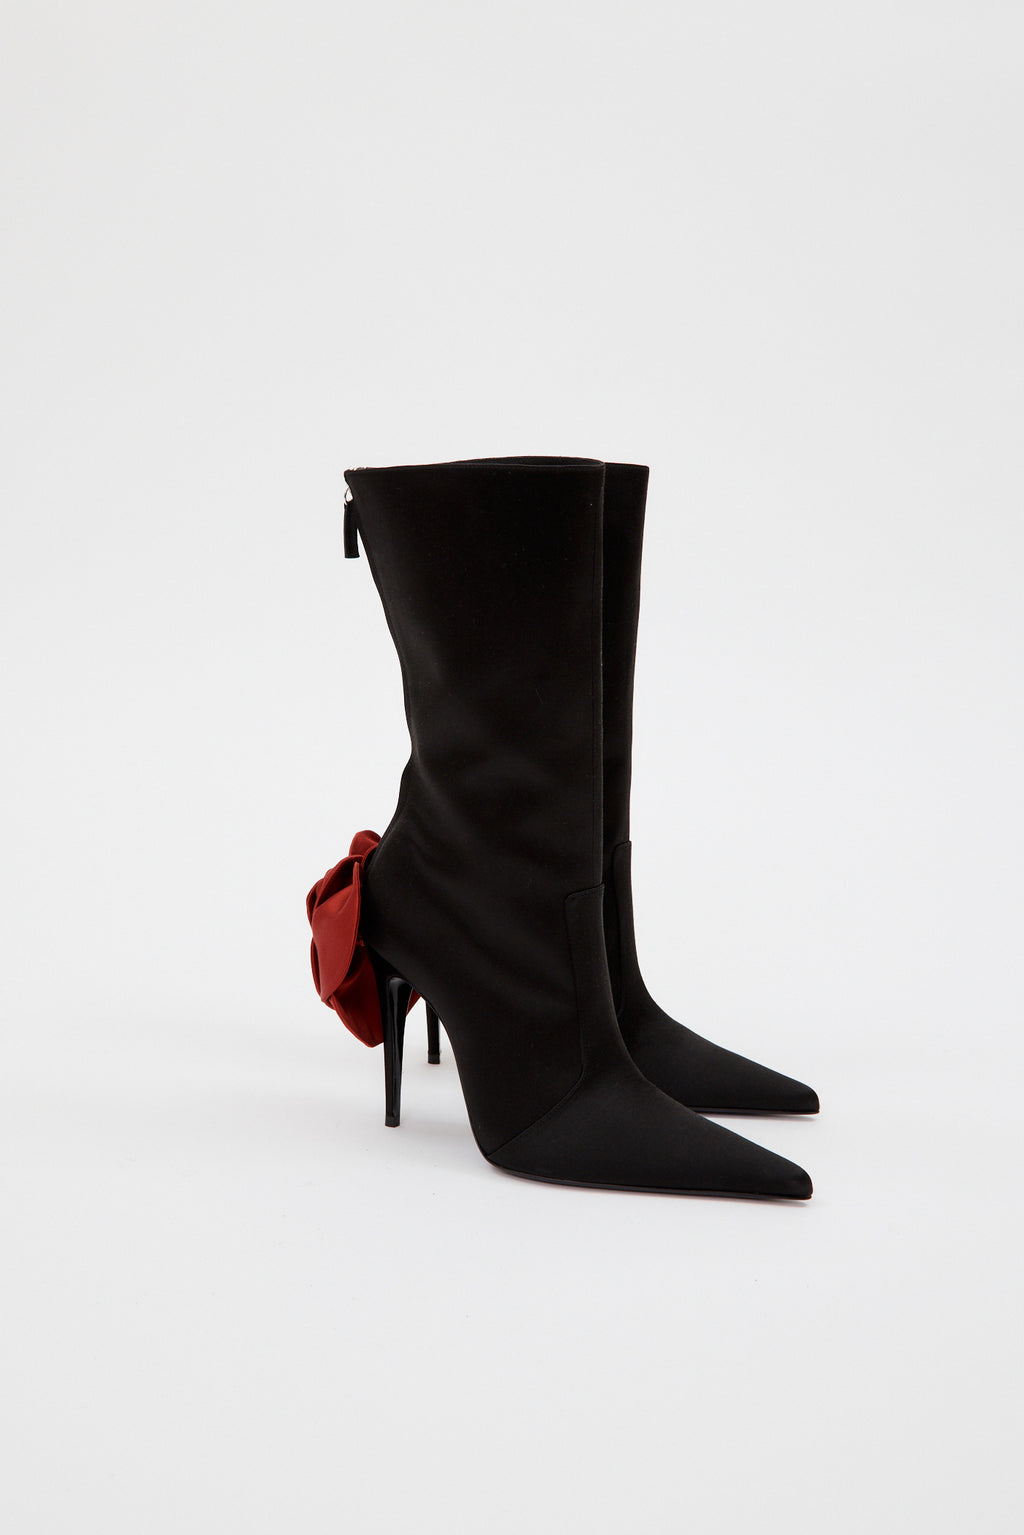 Pointed Toe Red Flower Black Boots